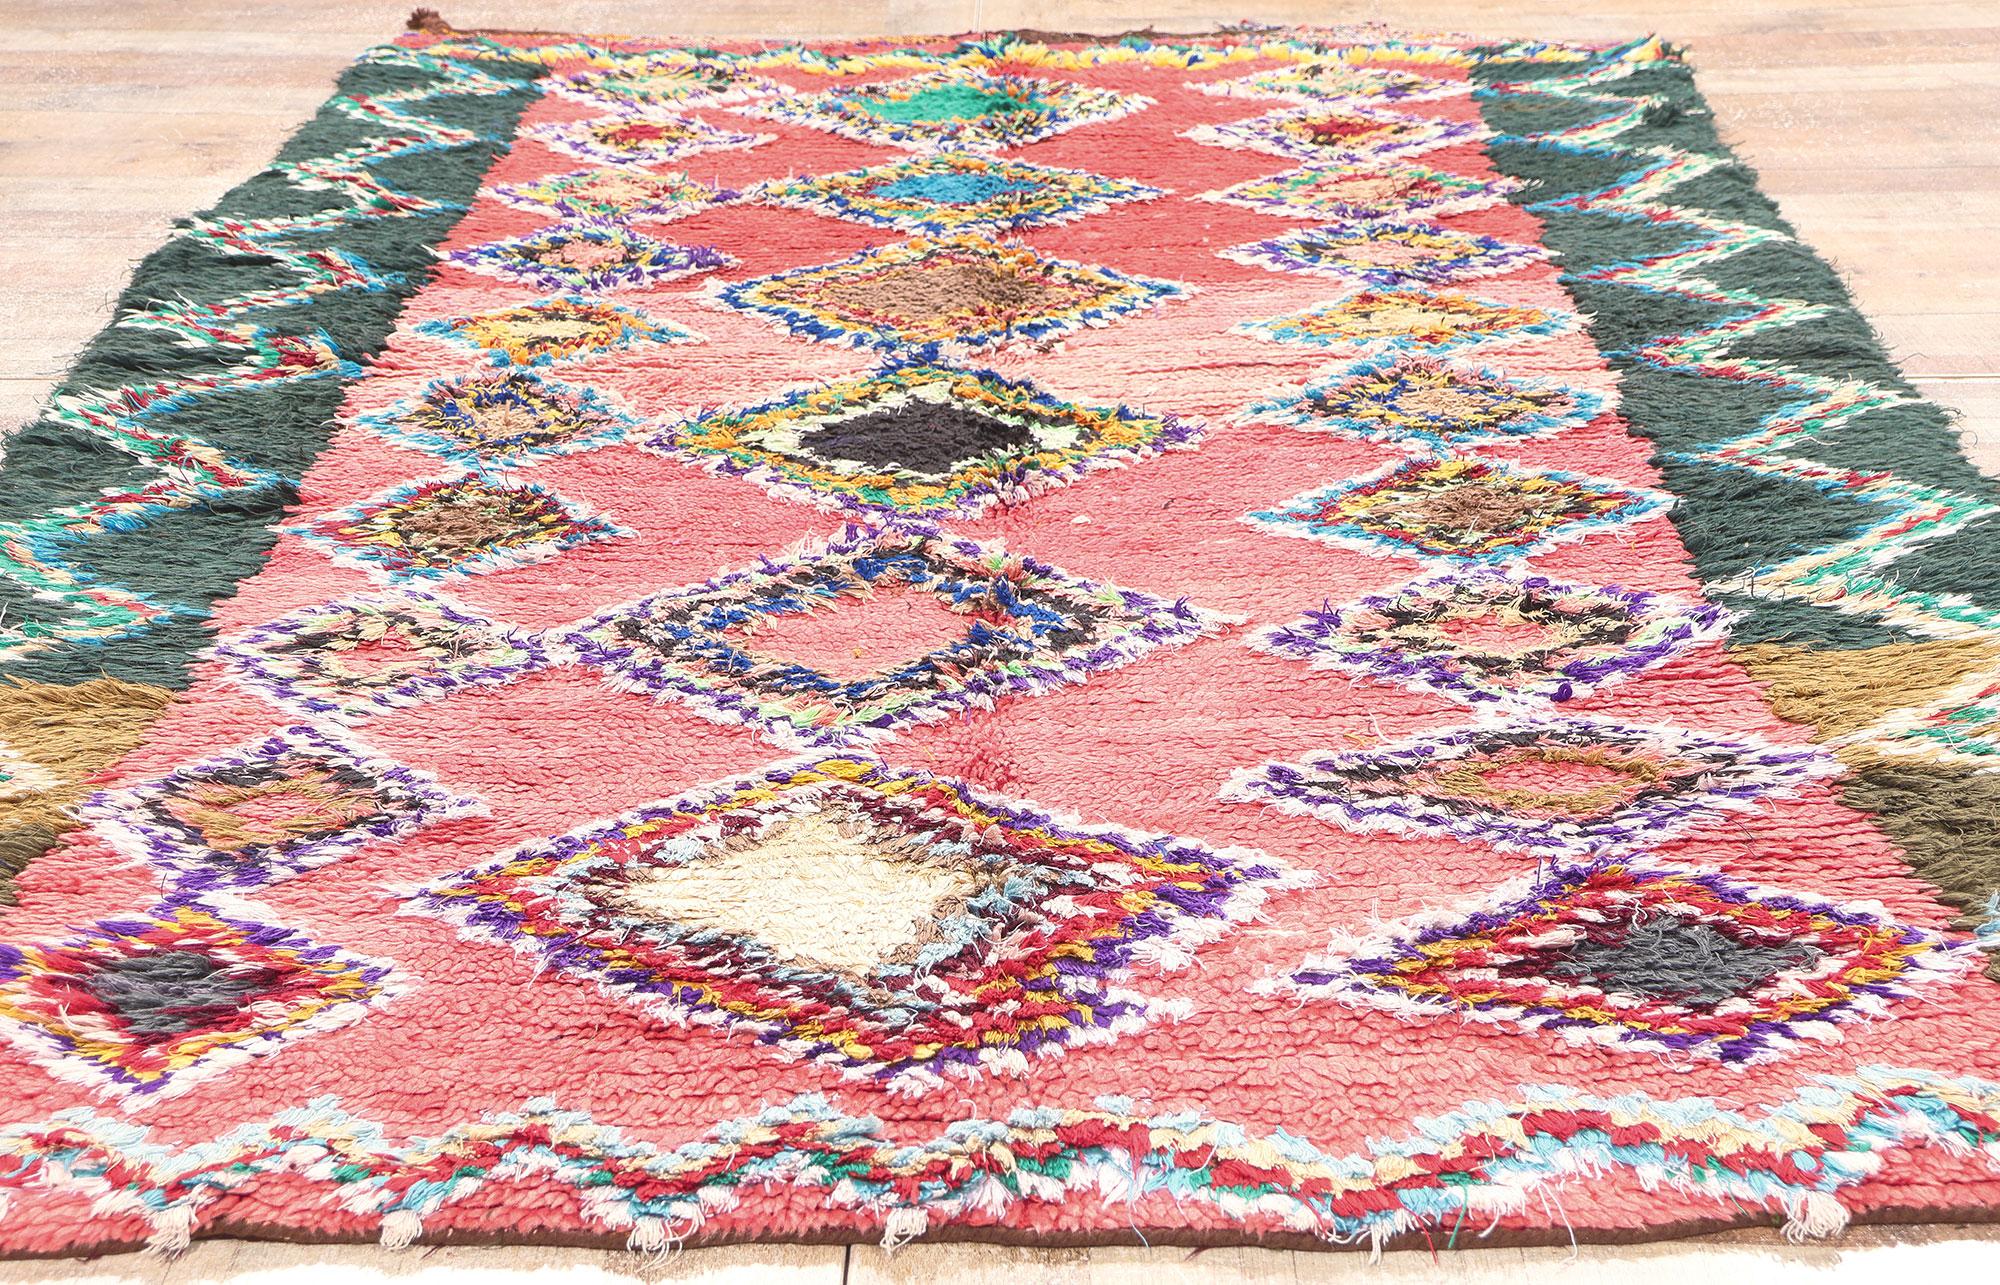 Vintage Boucherouite Moroccan Azilal Rag Rug by Berber Tribes of Morocco For Sale 1